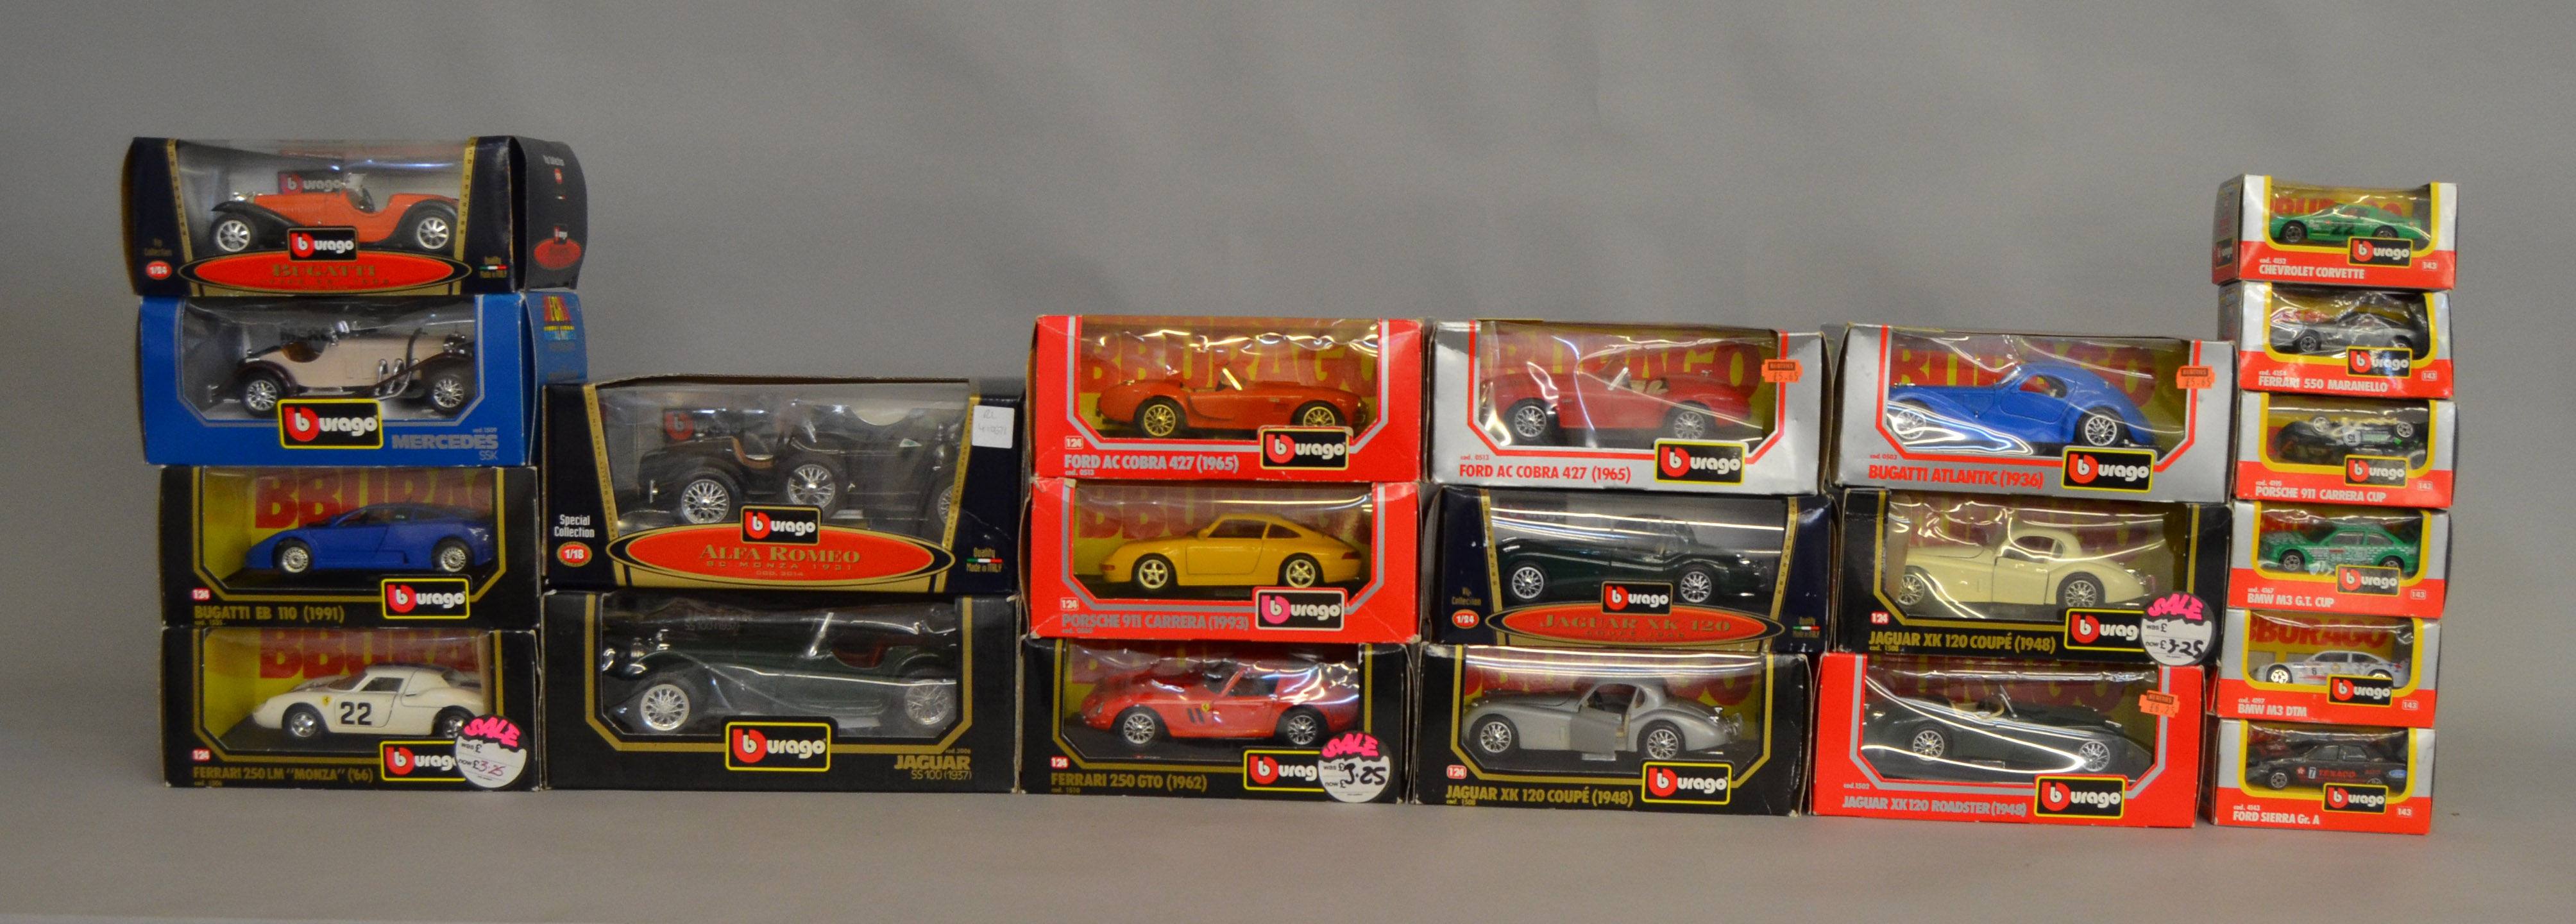 21x Bburago models of various scales including 1:18, 1:24 and 1:43, all boxed.